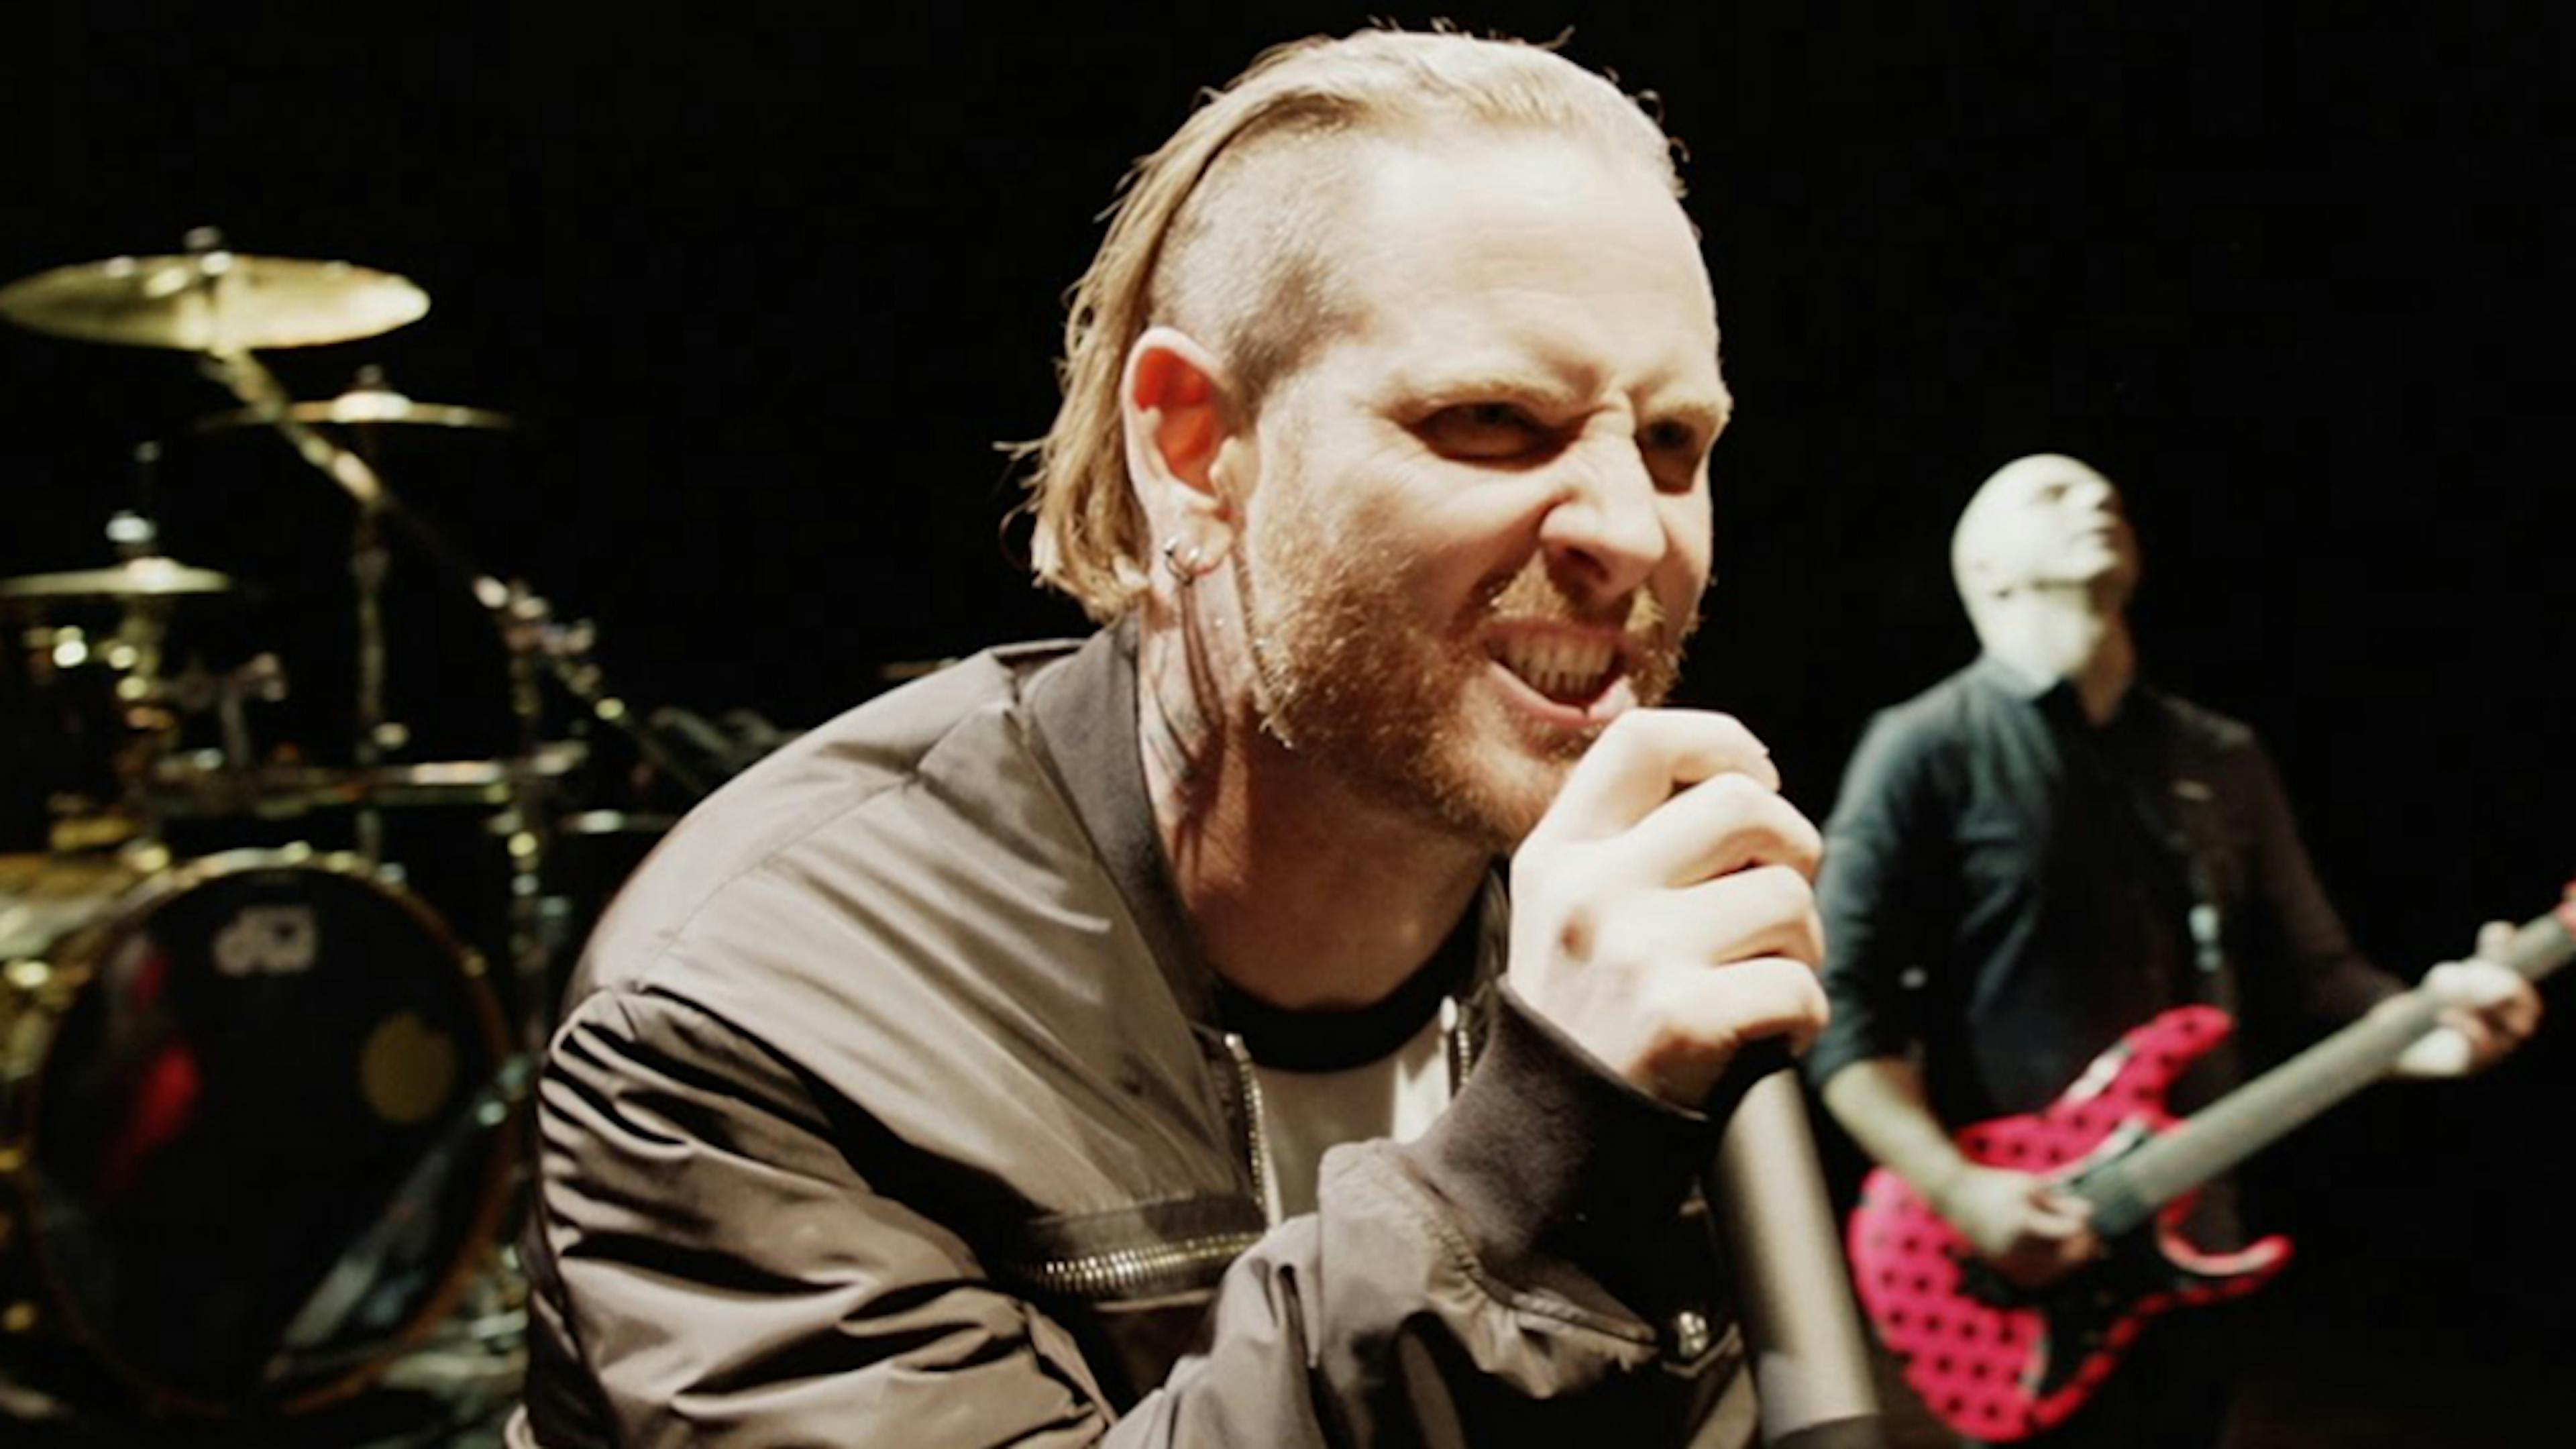 Corey Taylor is working on “very special” music with a British rapper